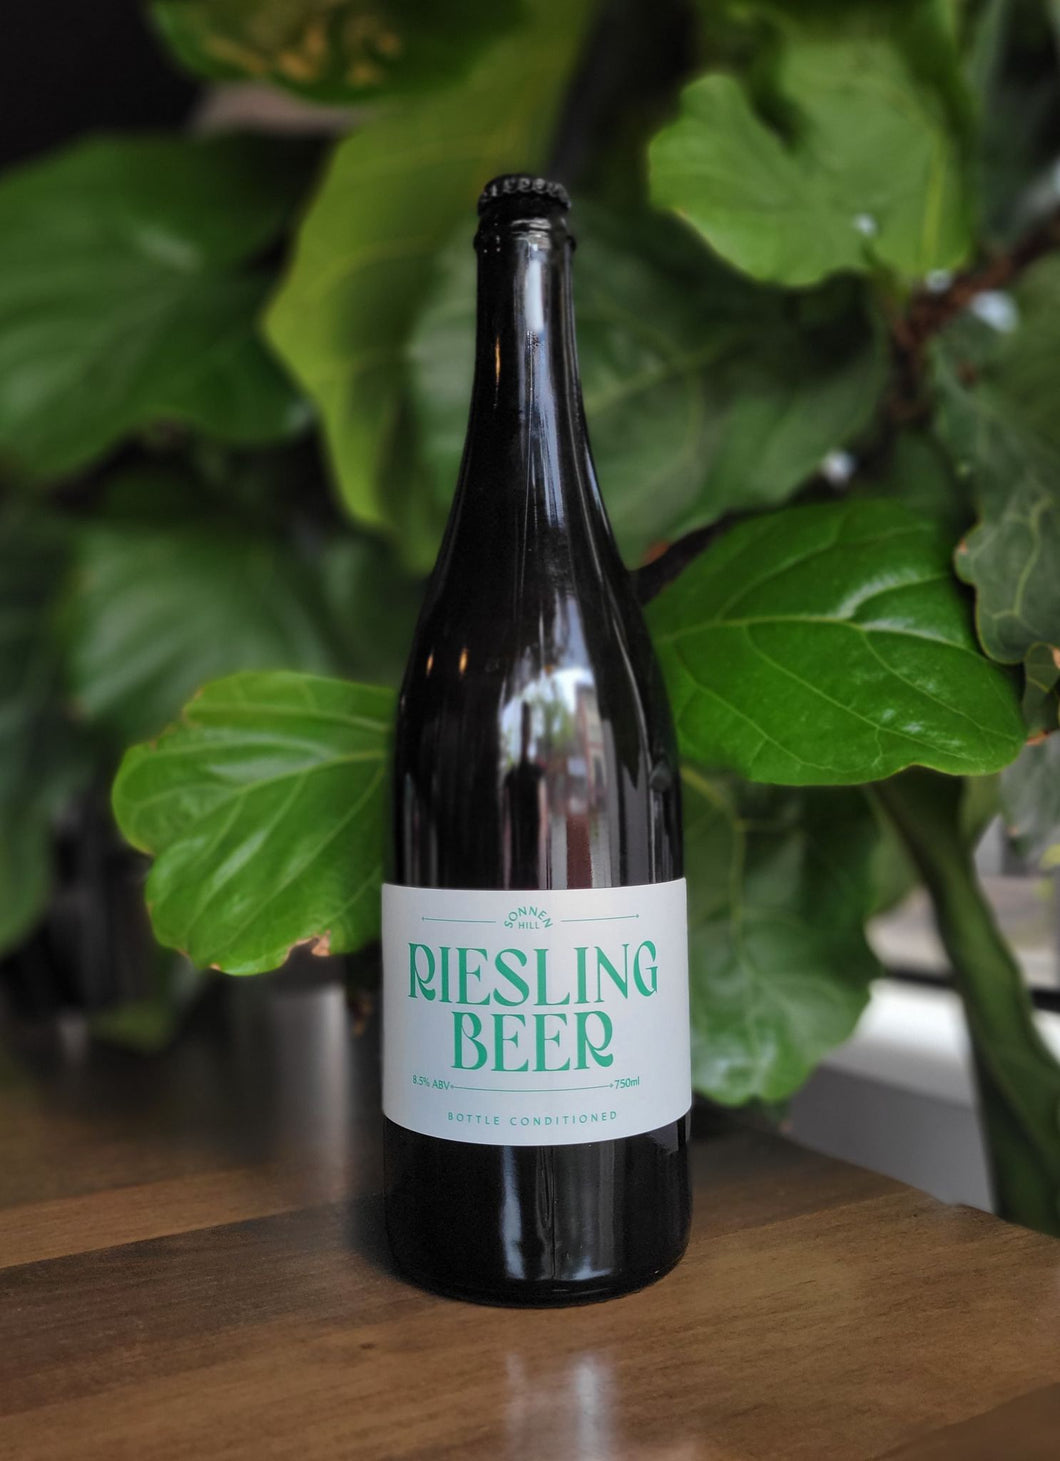 Sonnen Hill Riesling Beer